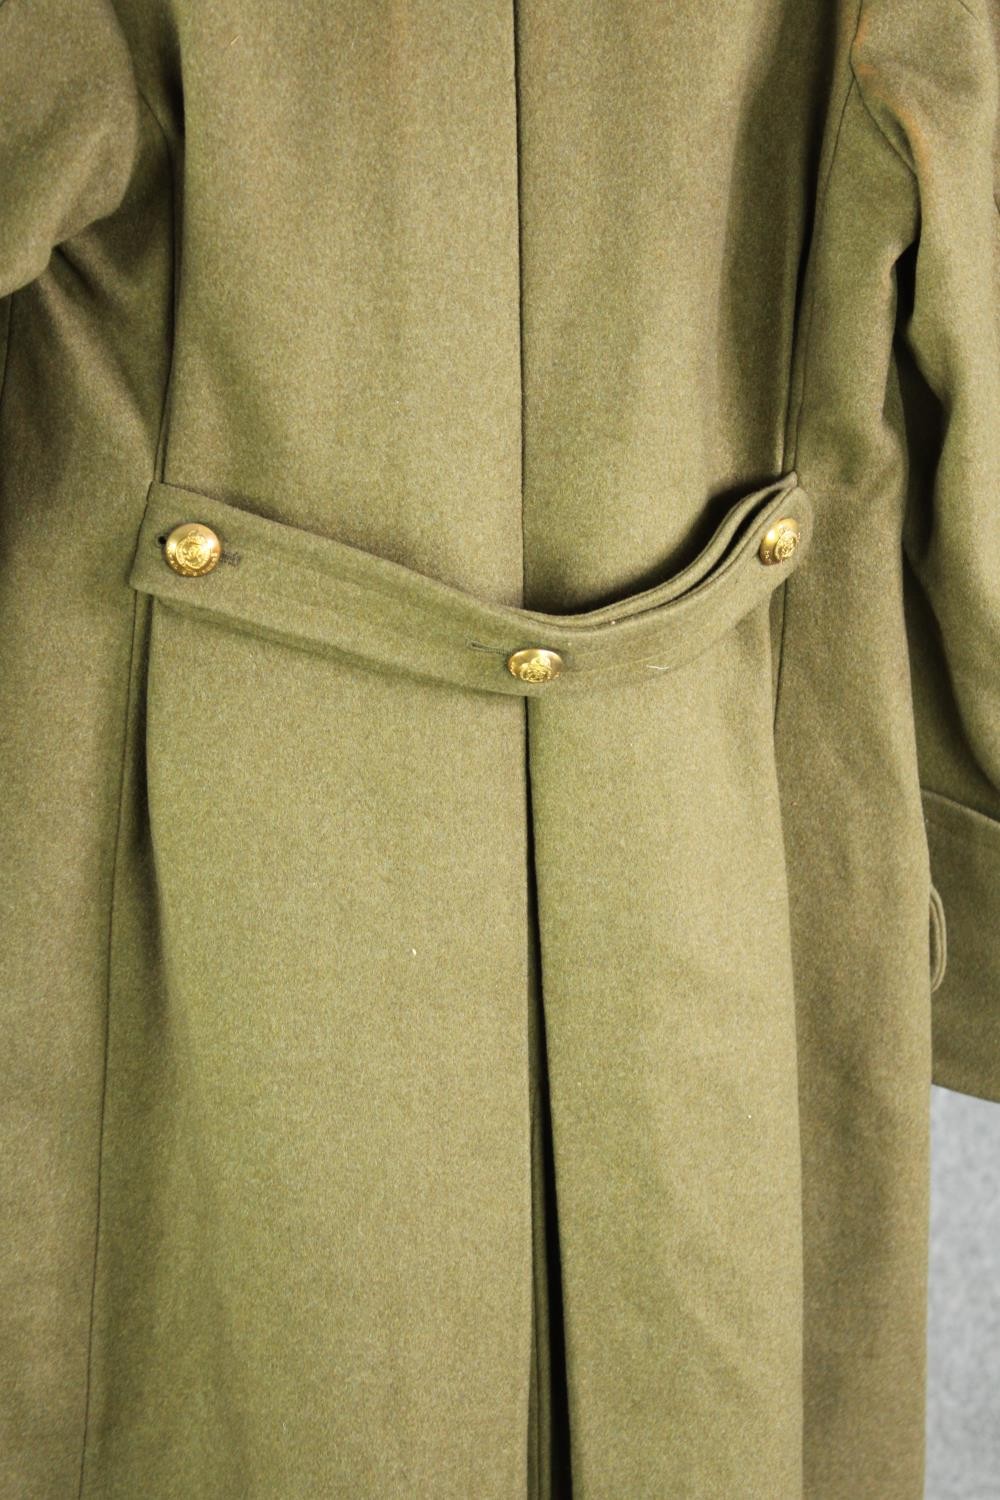 A British Army officer's Great Coat. - Image 8 of 8